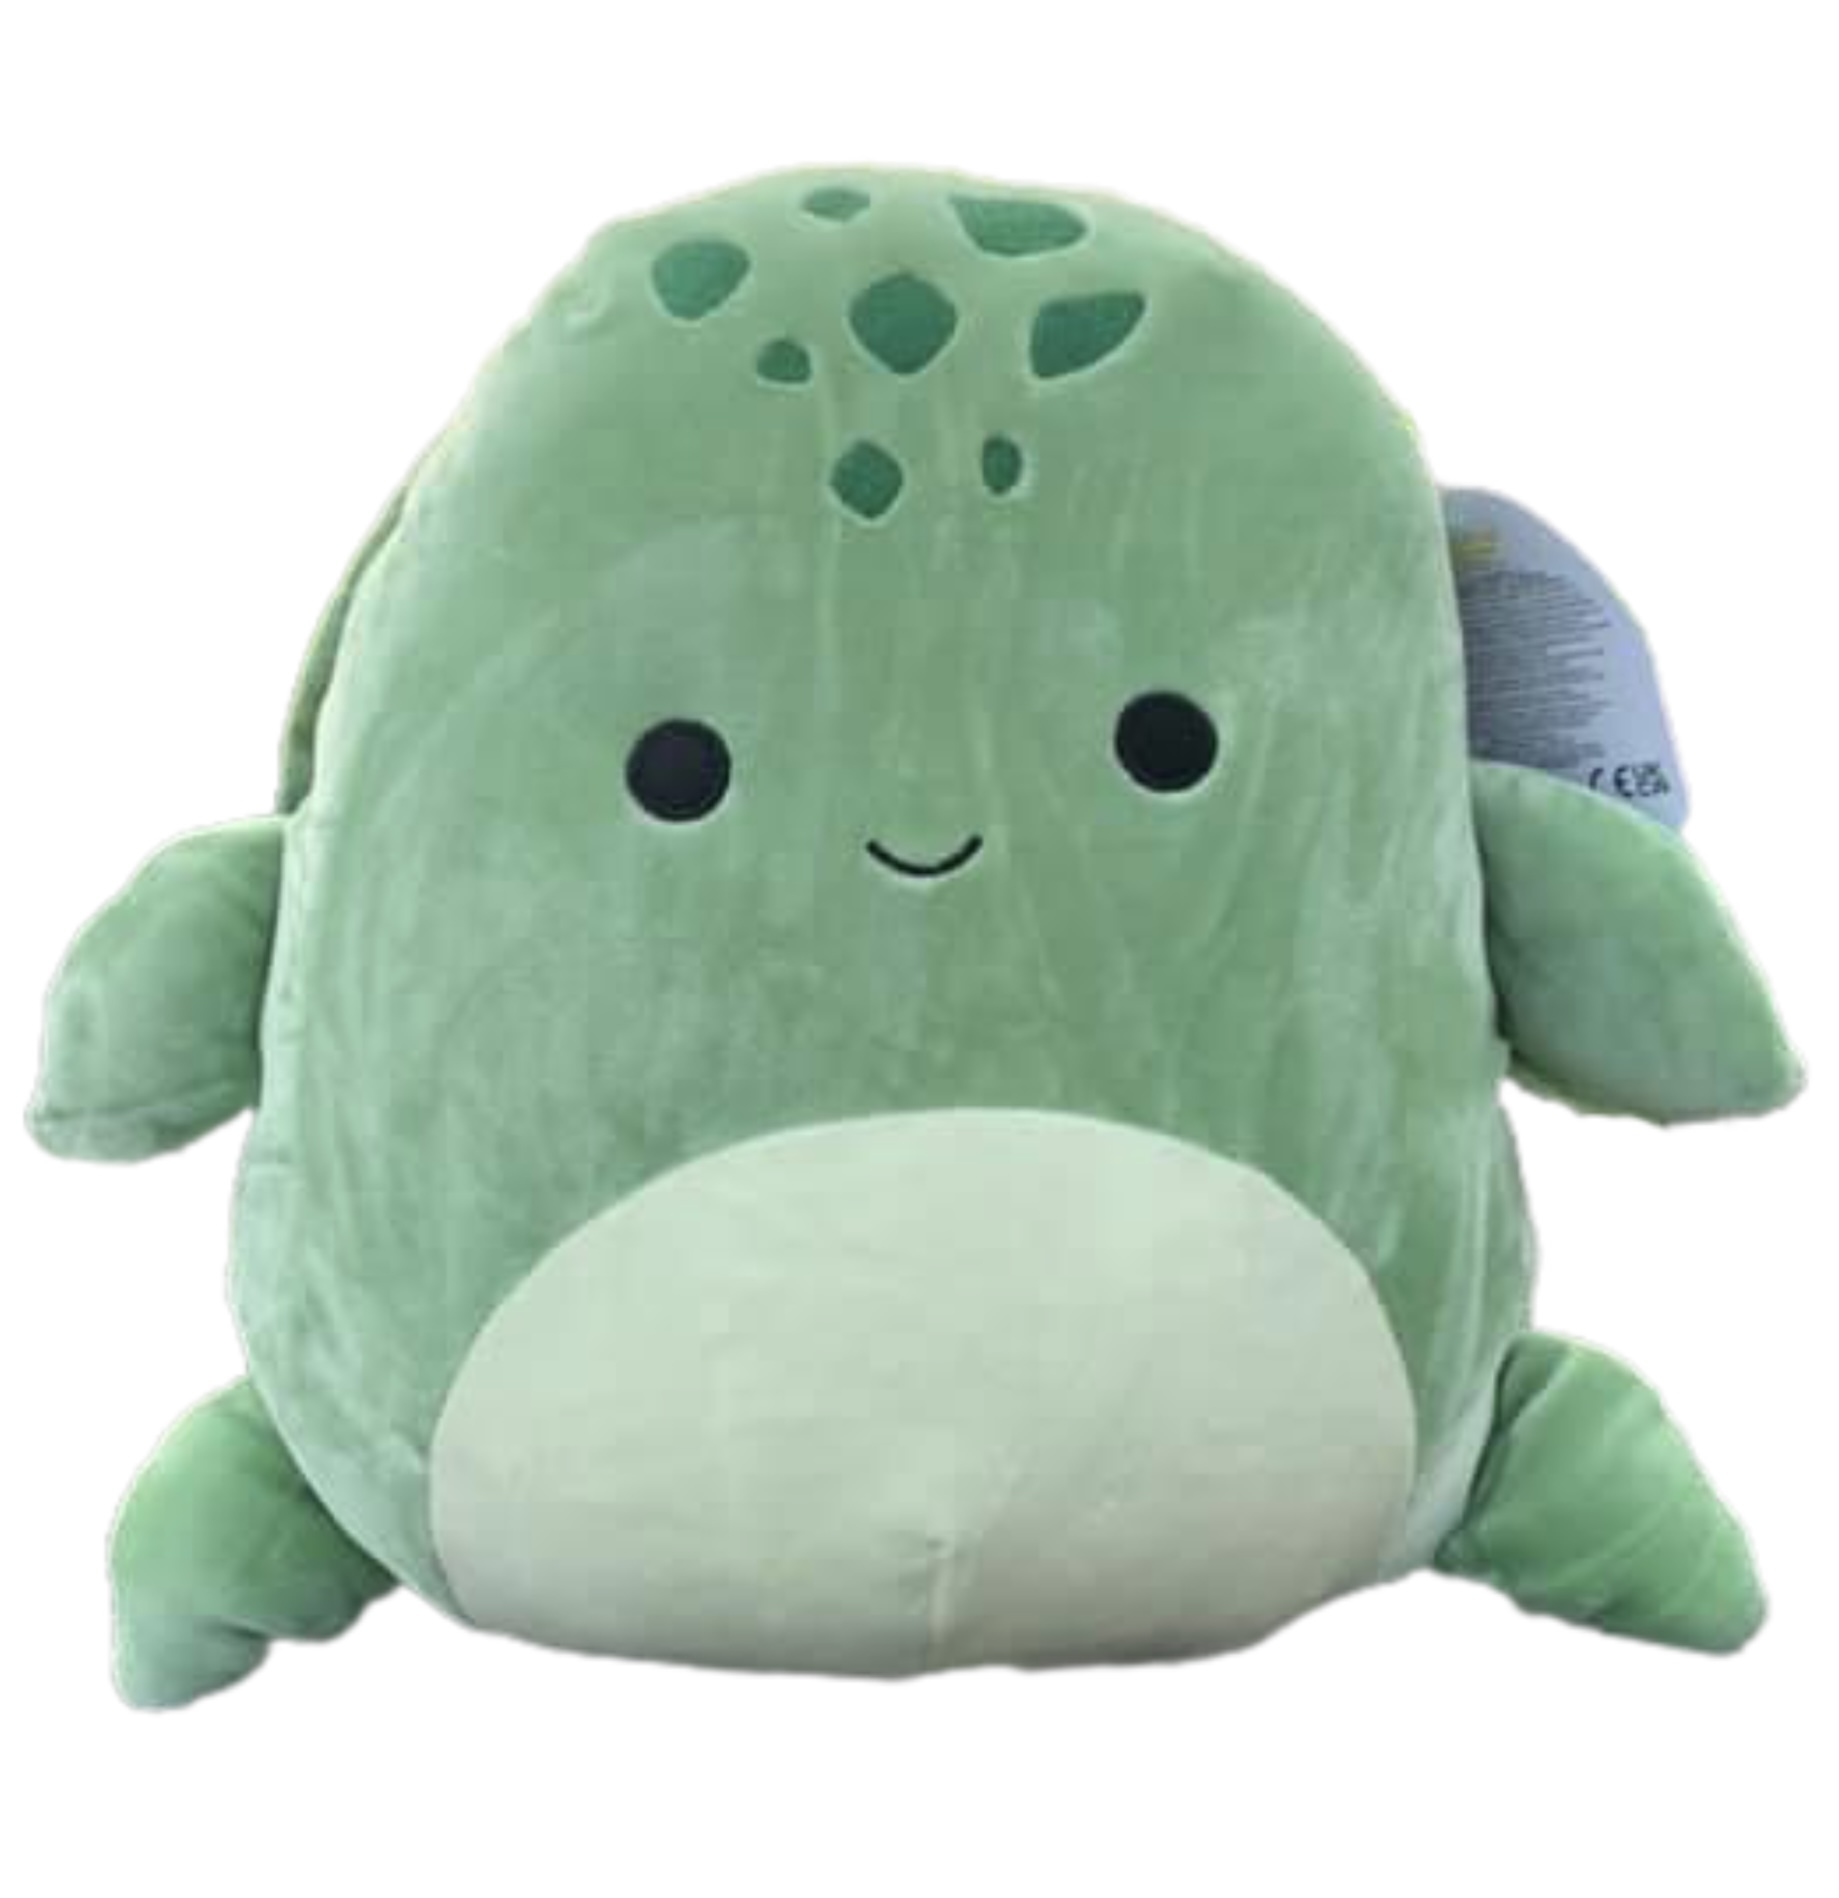 https://static.wikia.nocookie.net/squishmallowsquad/images/c/cc/Cole001.jpg/revision/latest?cb=20210510235714